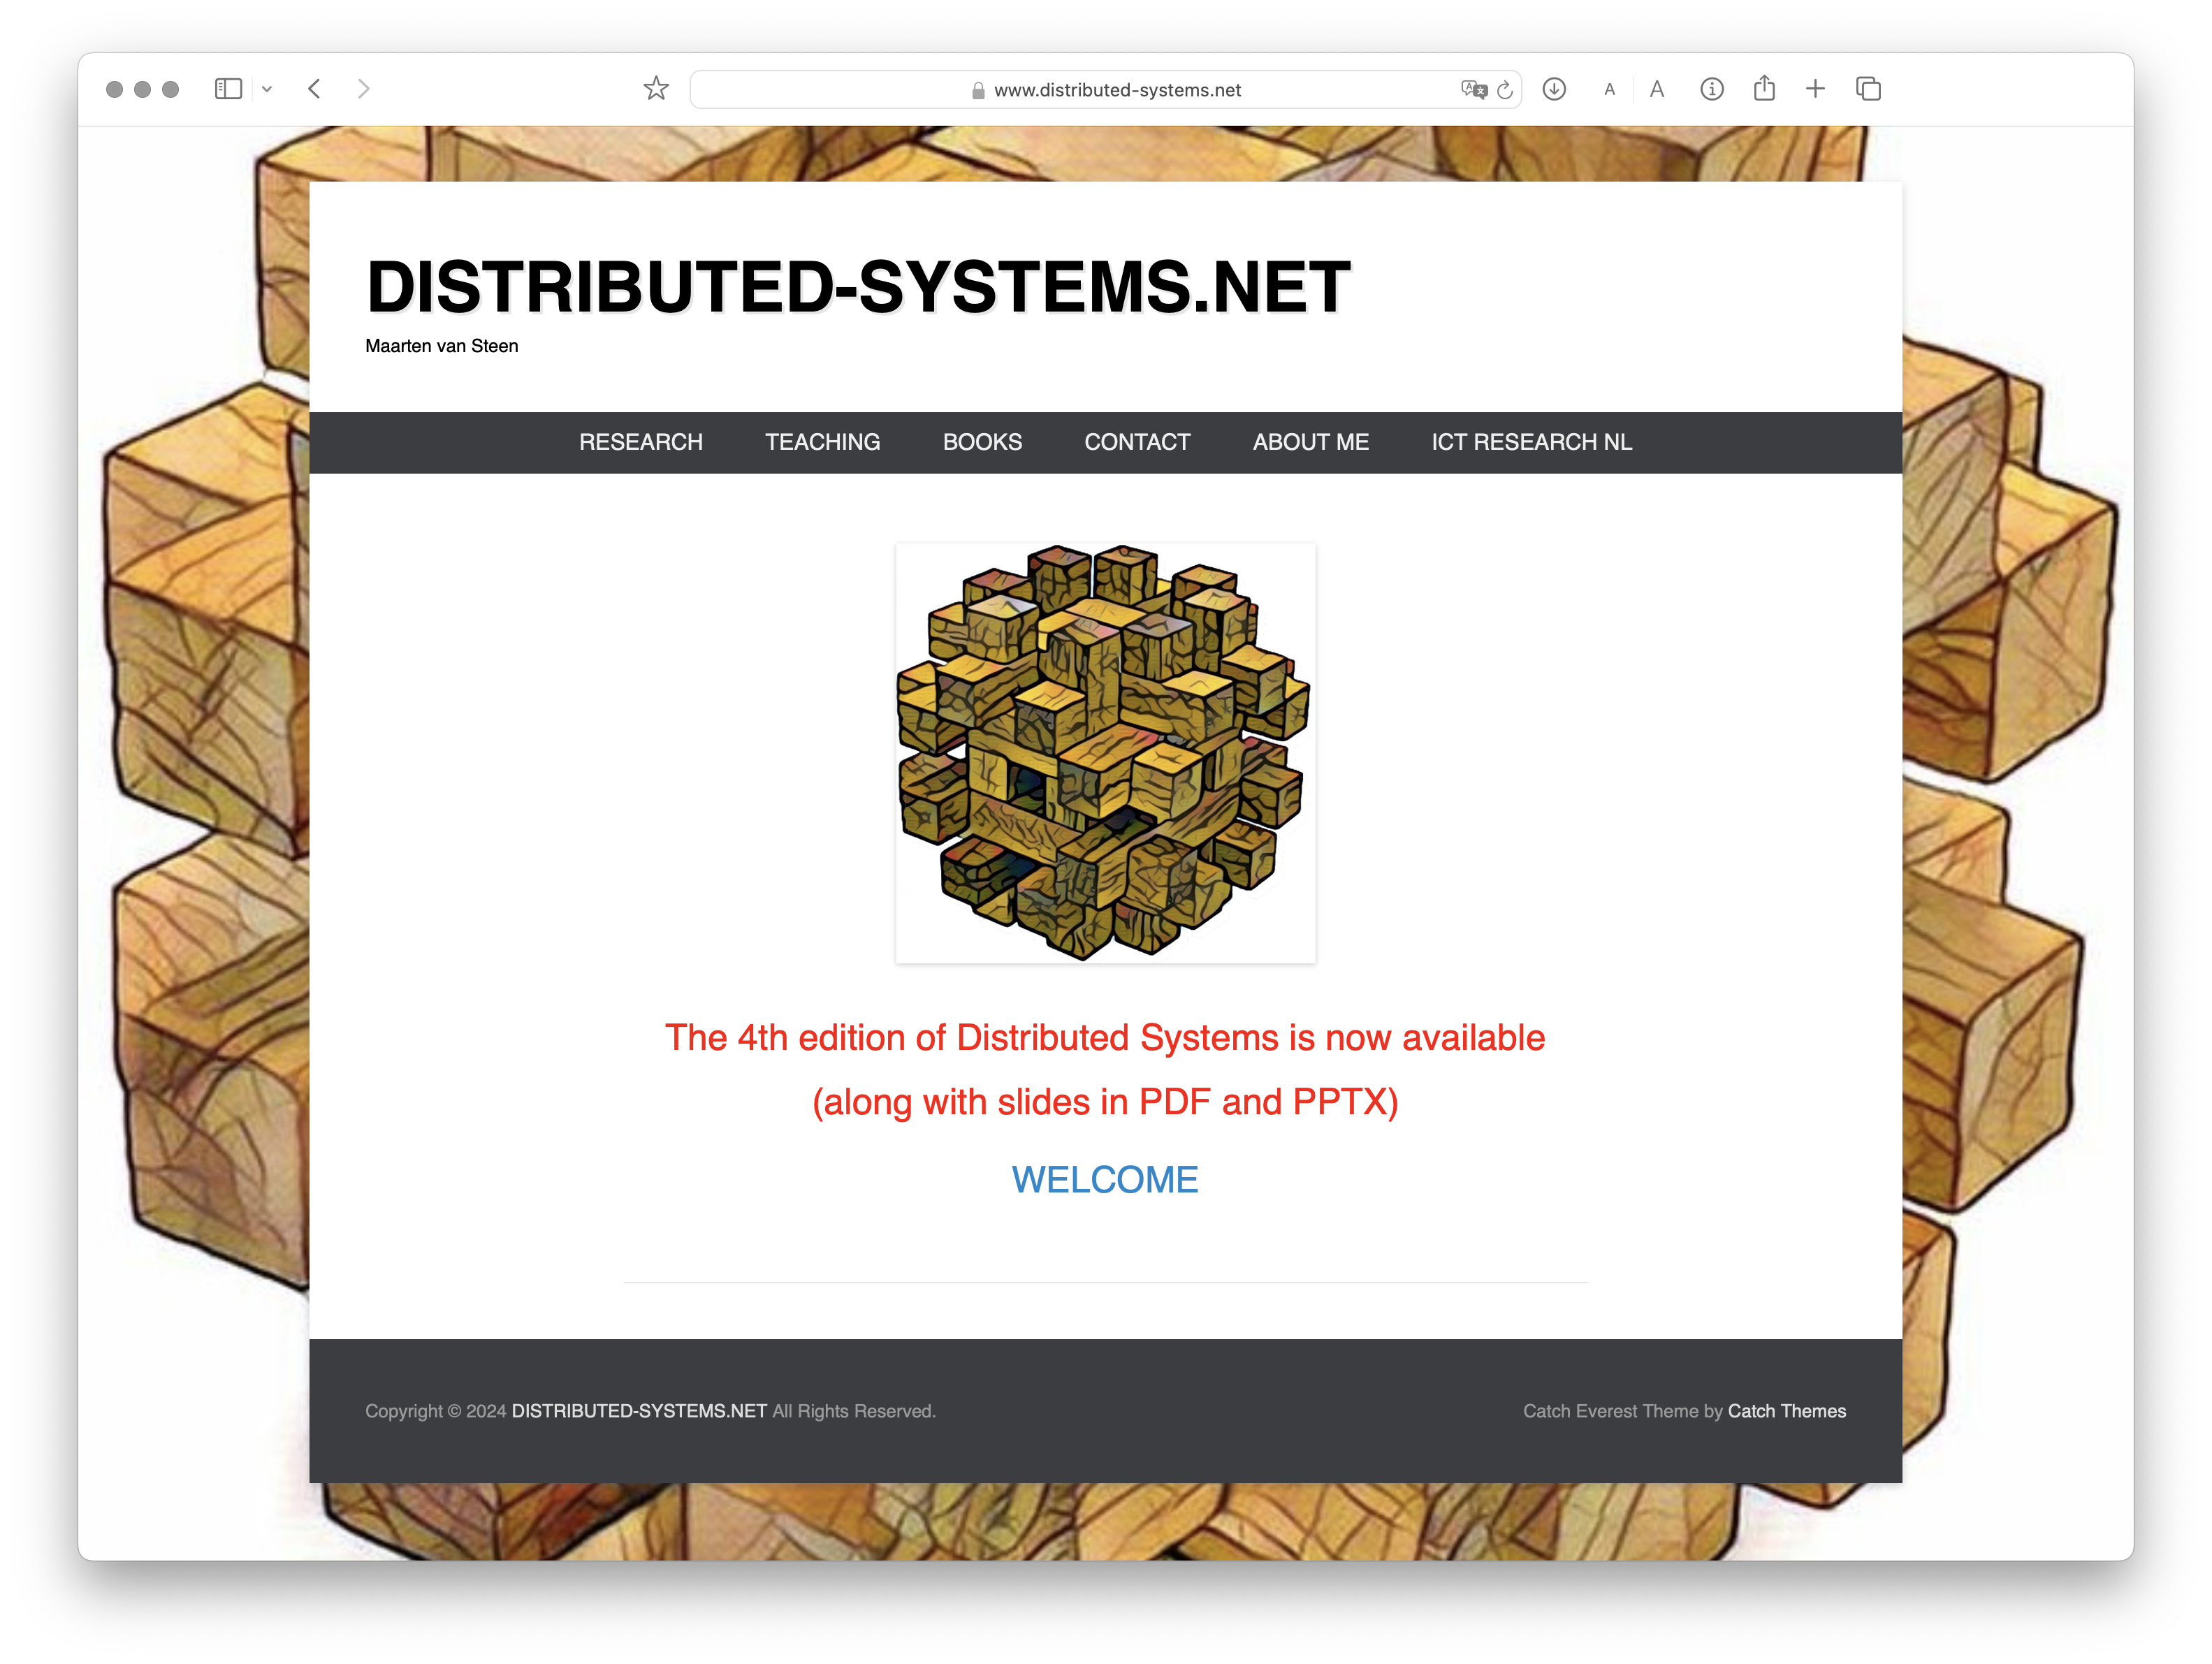 screenshots/distributed-systems.net.png